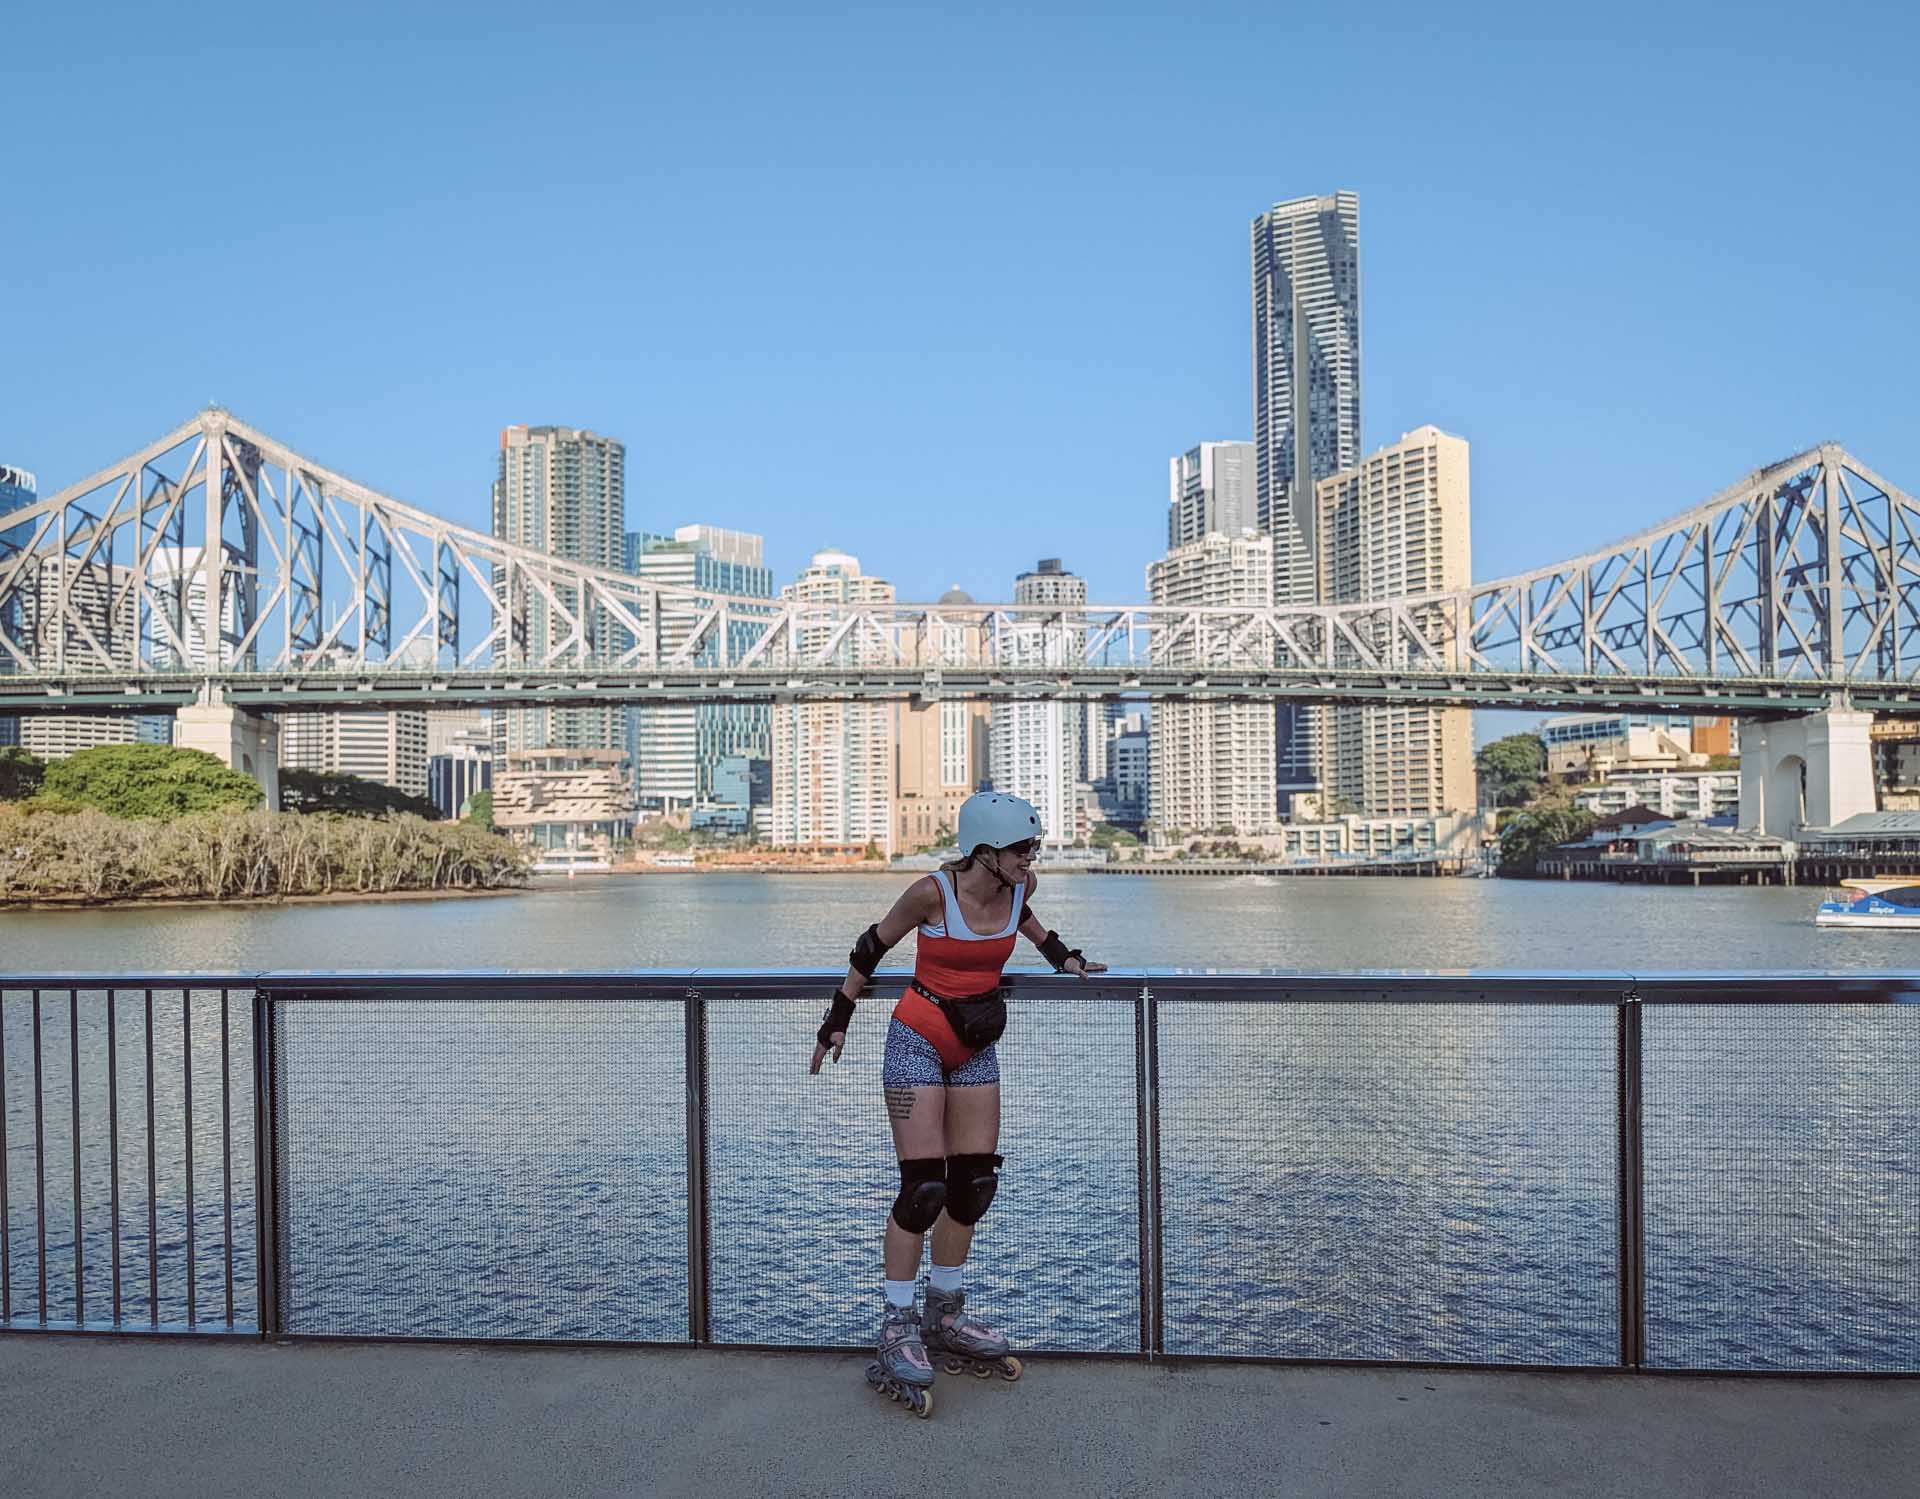 A 4am Rollerblading Commute to Work, rollerblading, brisbane, microadventure, woman in red leotard and rollerblades posing for a photo in front of the story bridge